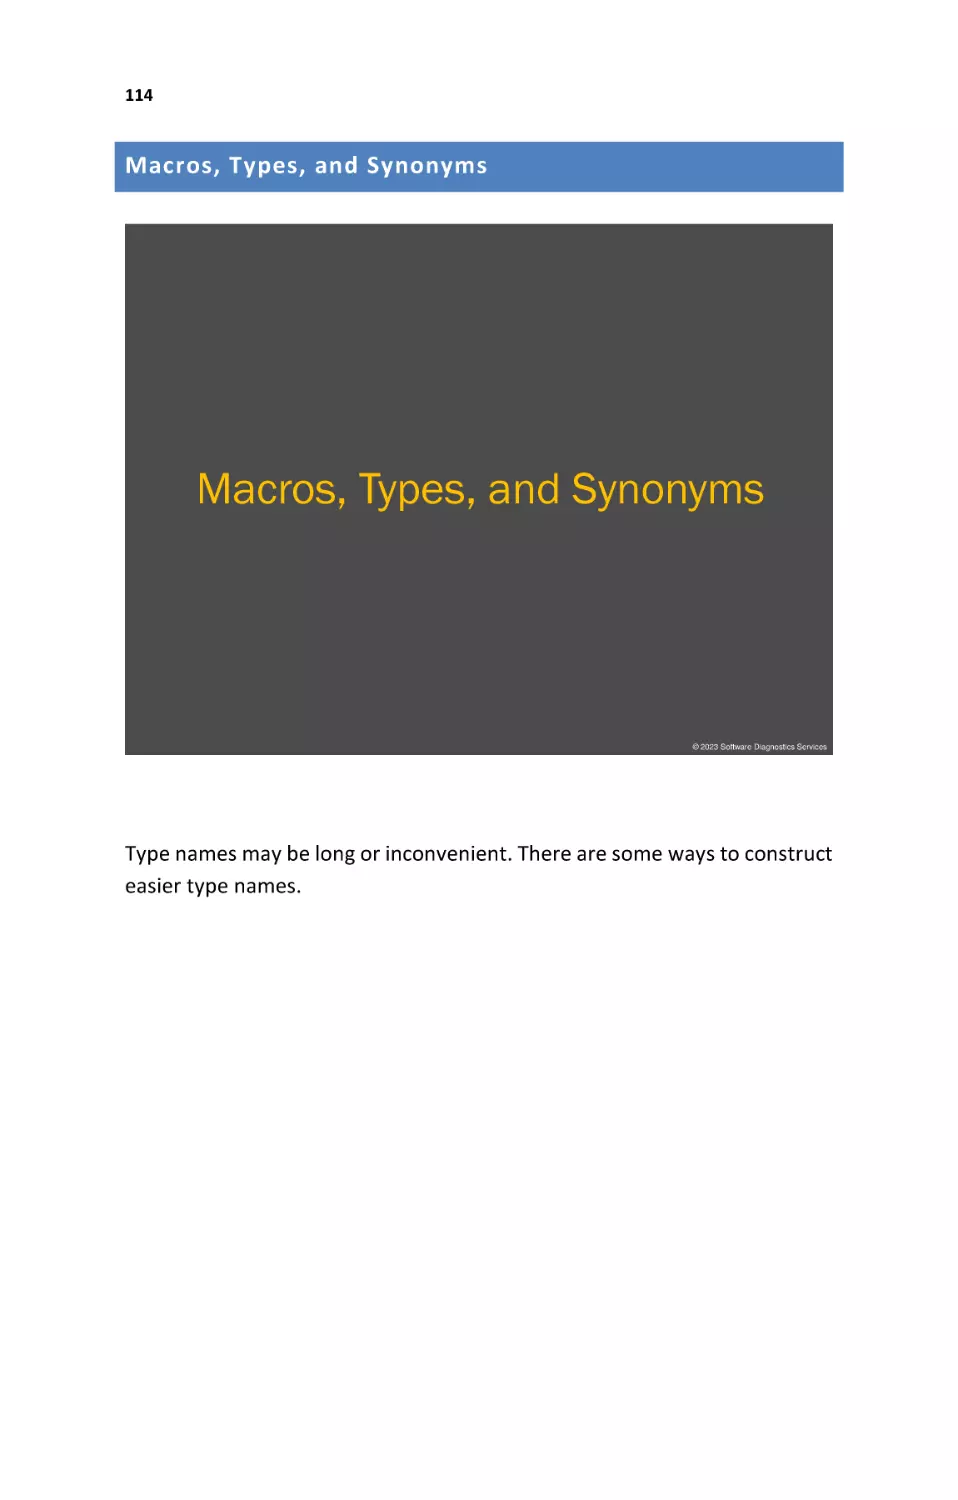 Macros, Types, and Synonyms